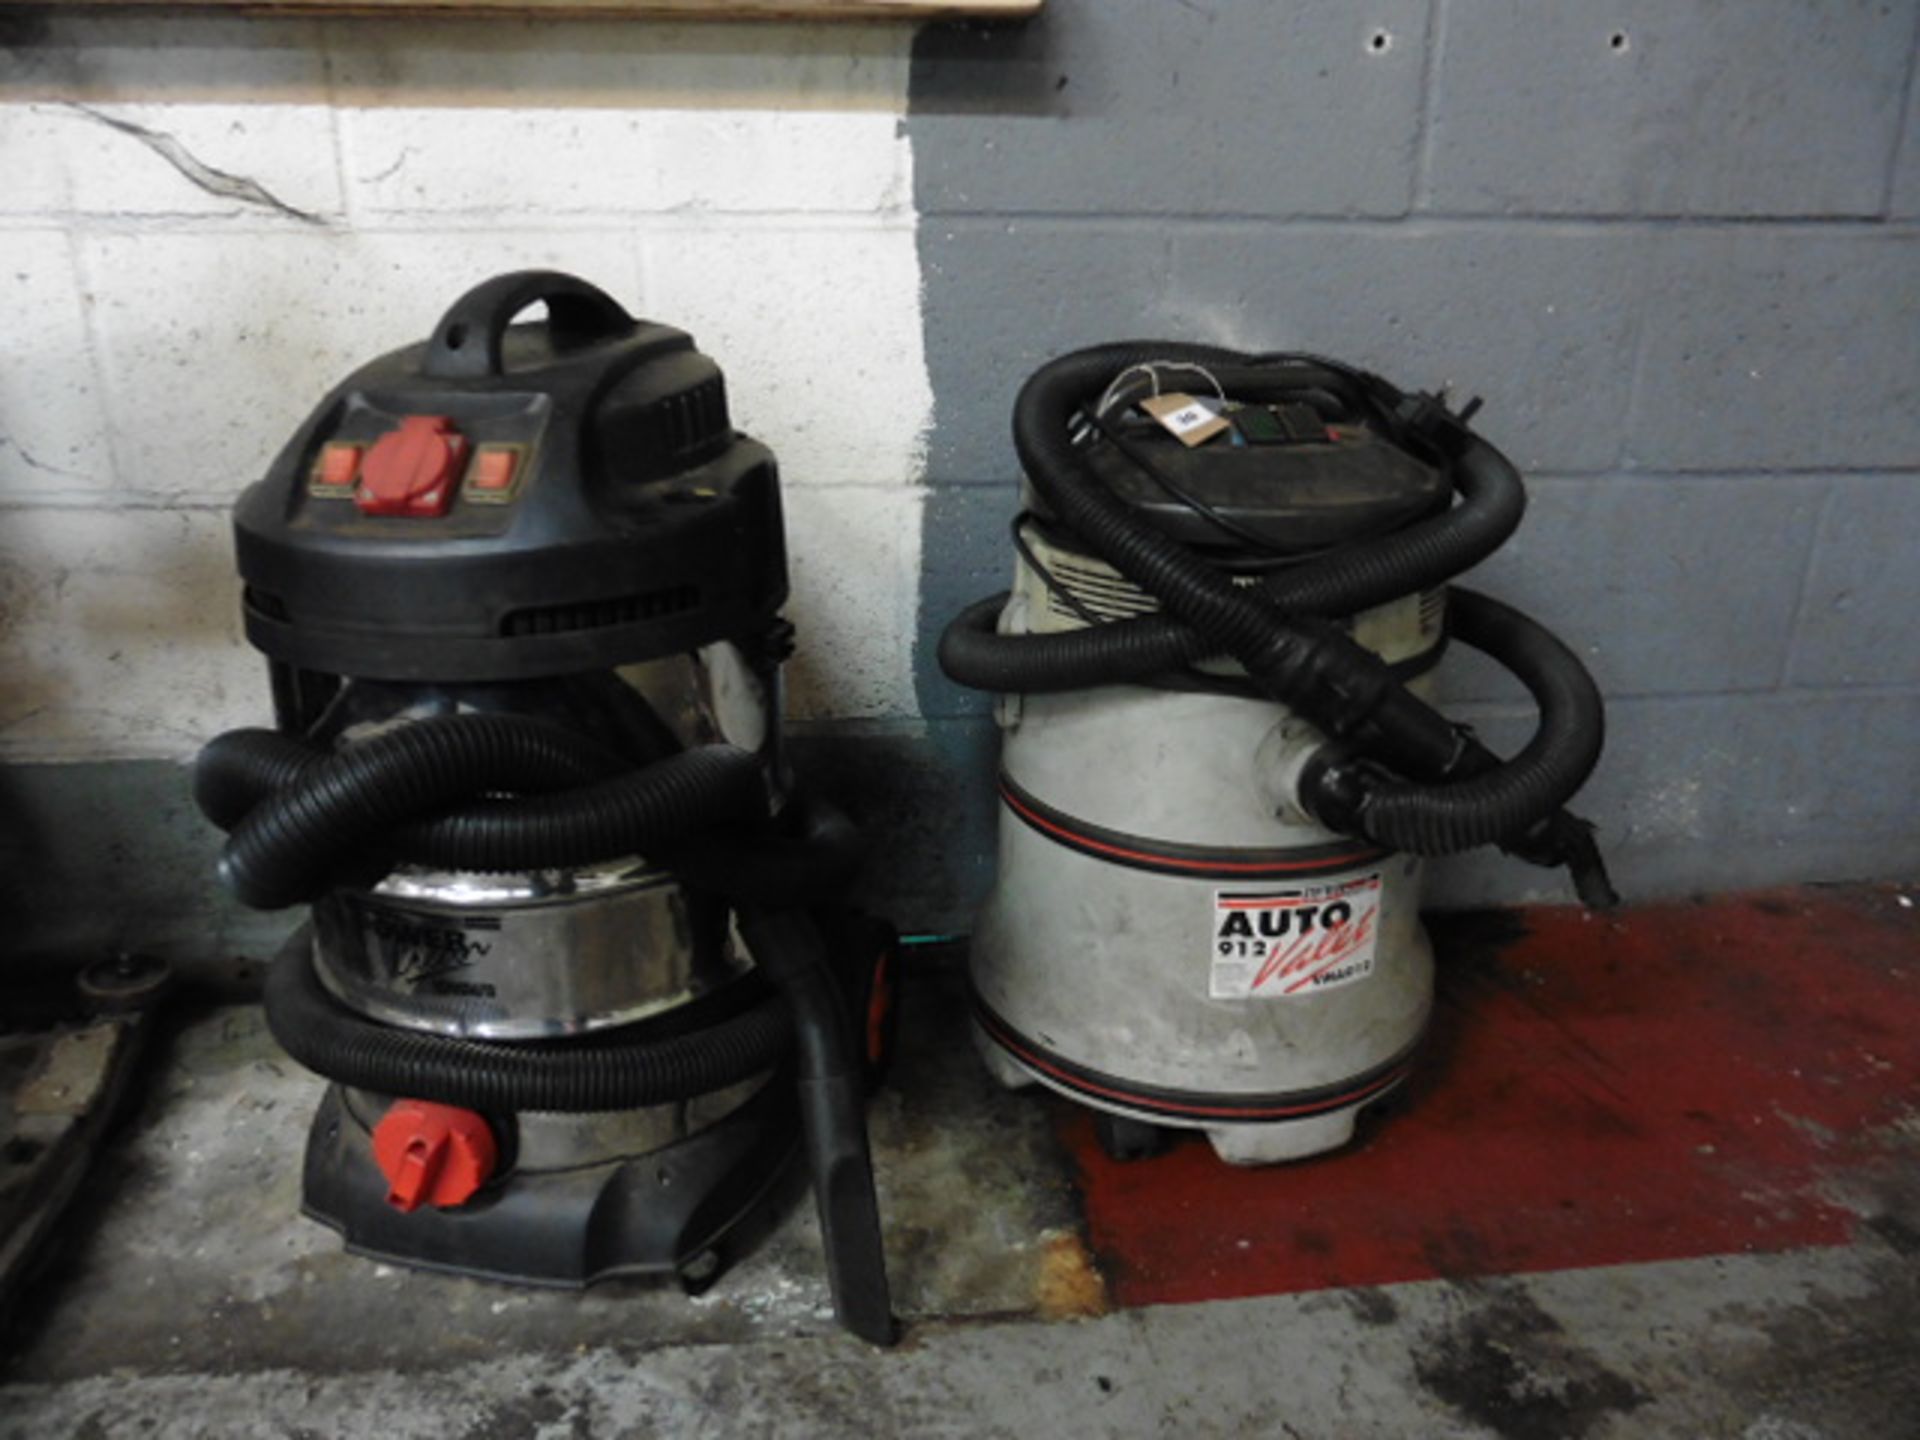 Sealey wet & dry vacuum cleaner and a Sealey industrial vacuum cleaner